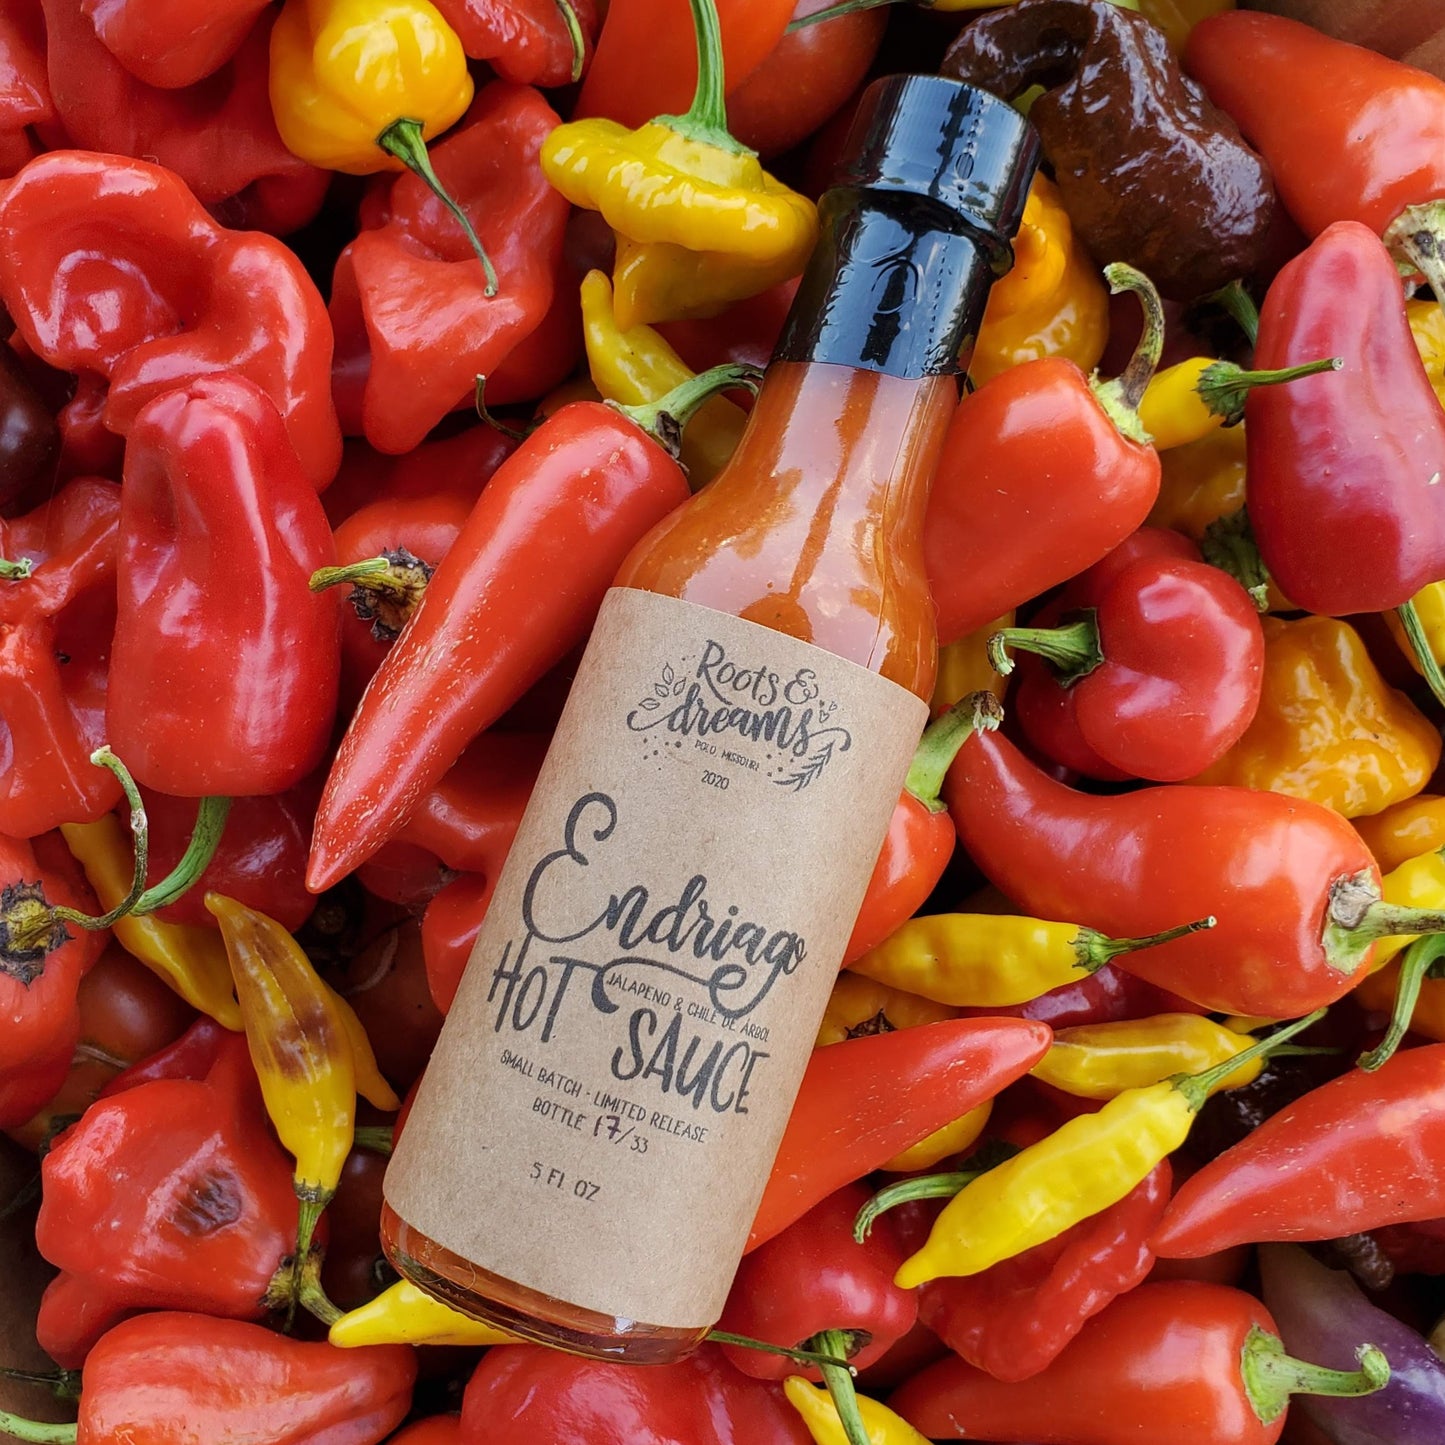 Endriago Hot Sauce by Roots and Dreams Farm